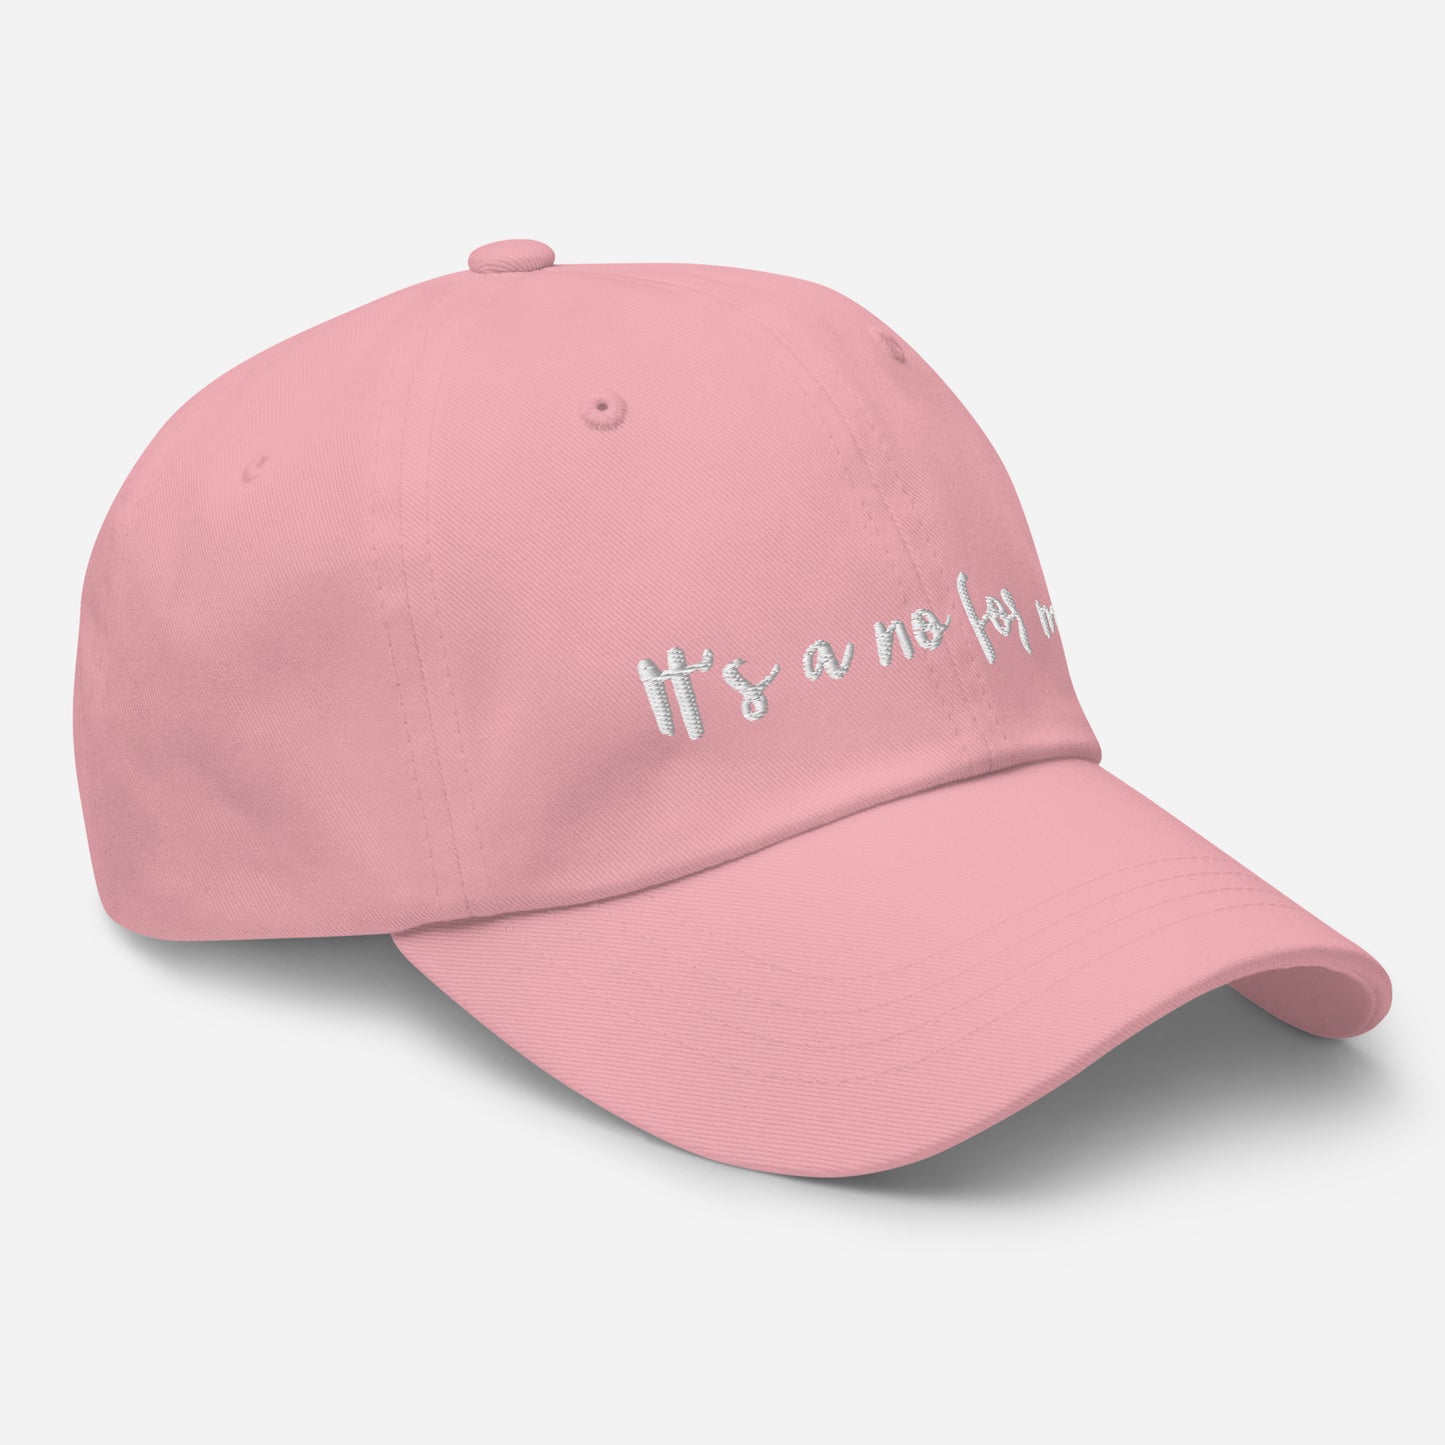 it's a No for Me Dad hat